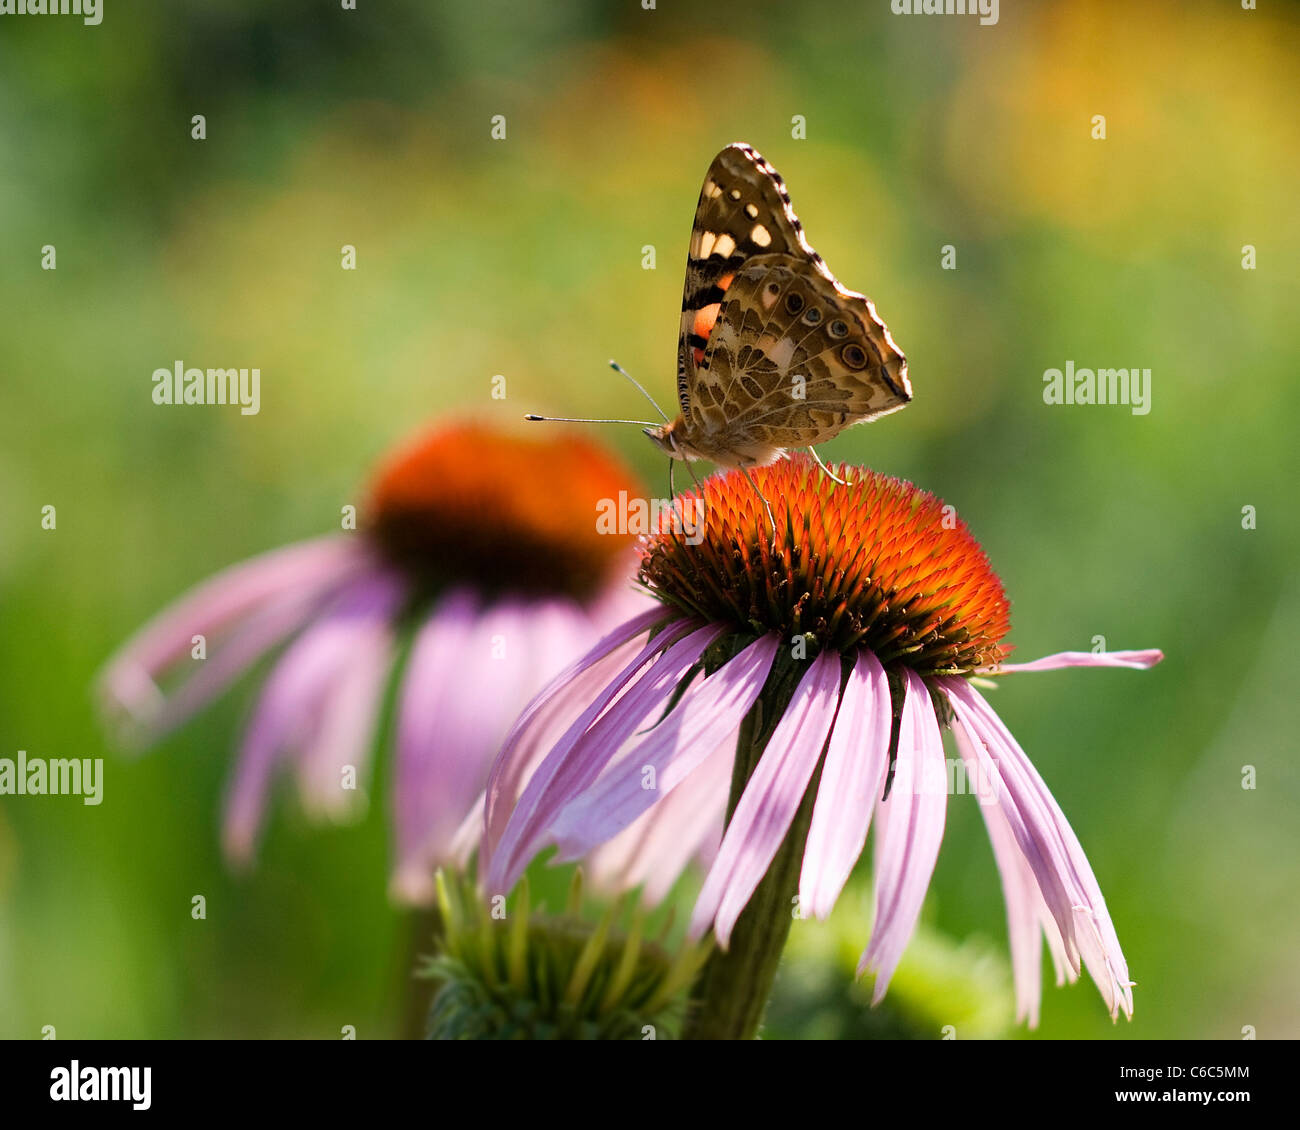 Butterfly on Echinacea flower Stock Photo